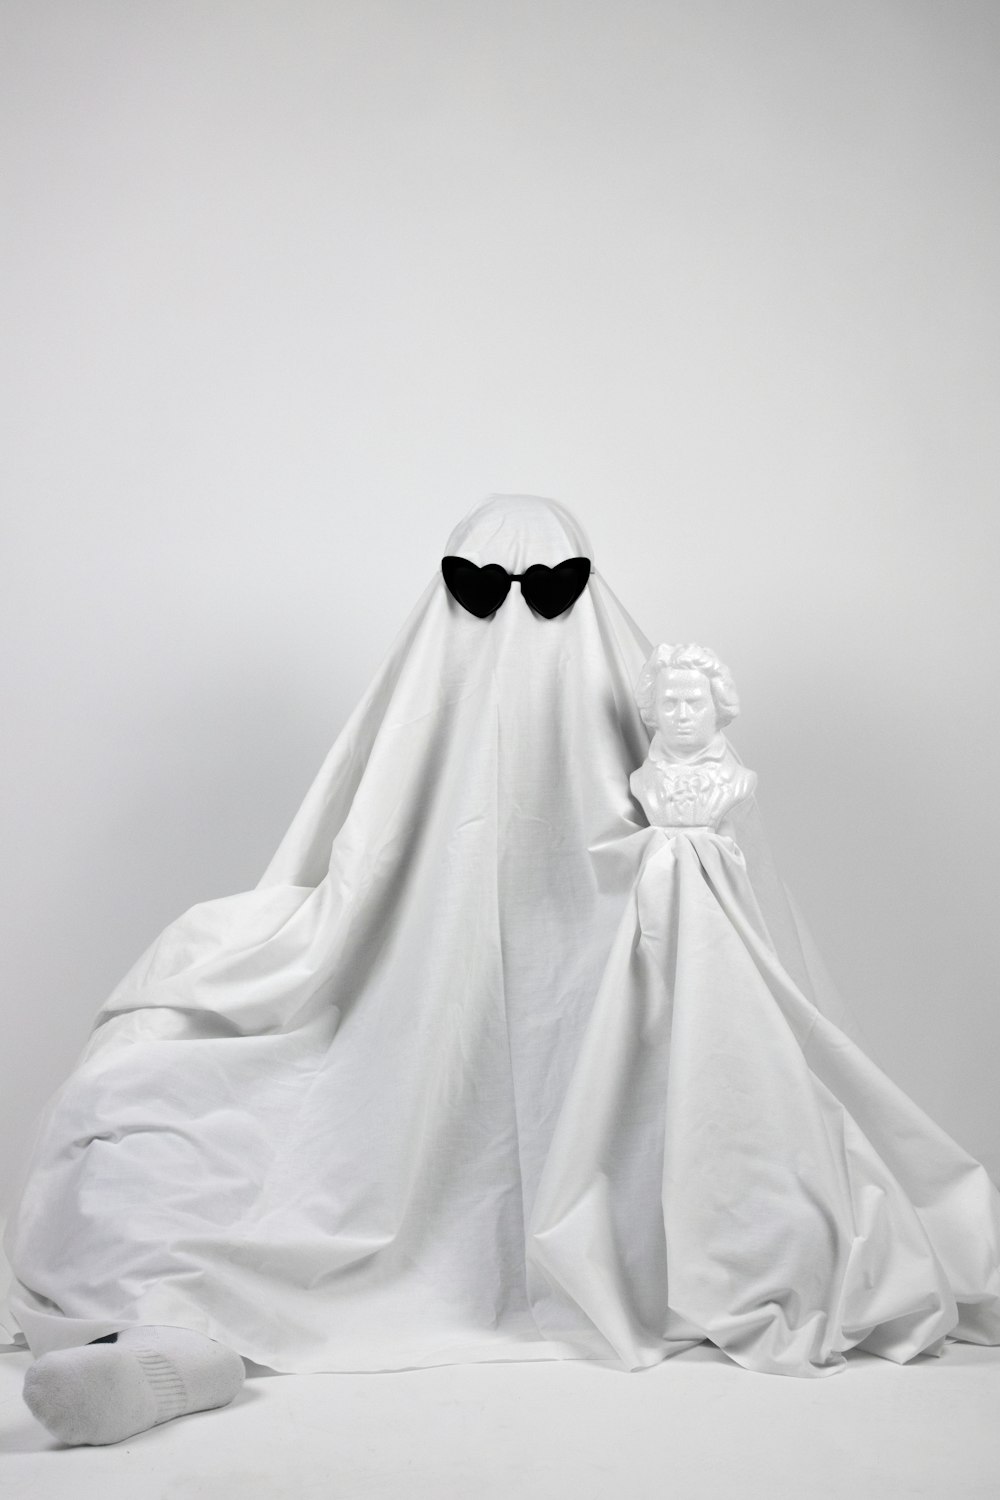 a white ghost with black eyes and a white cloak